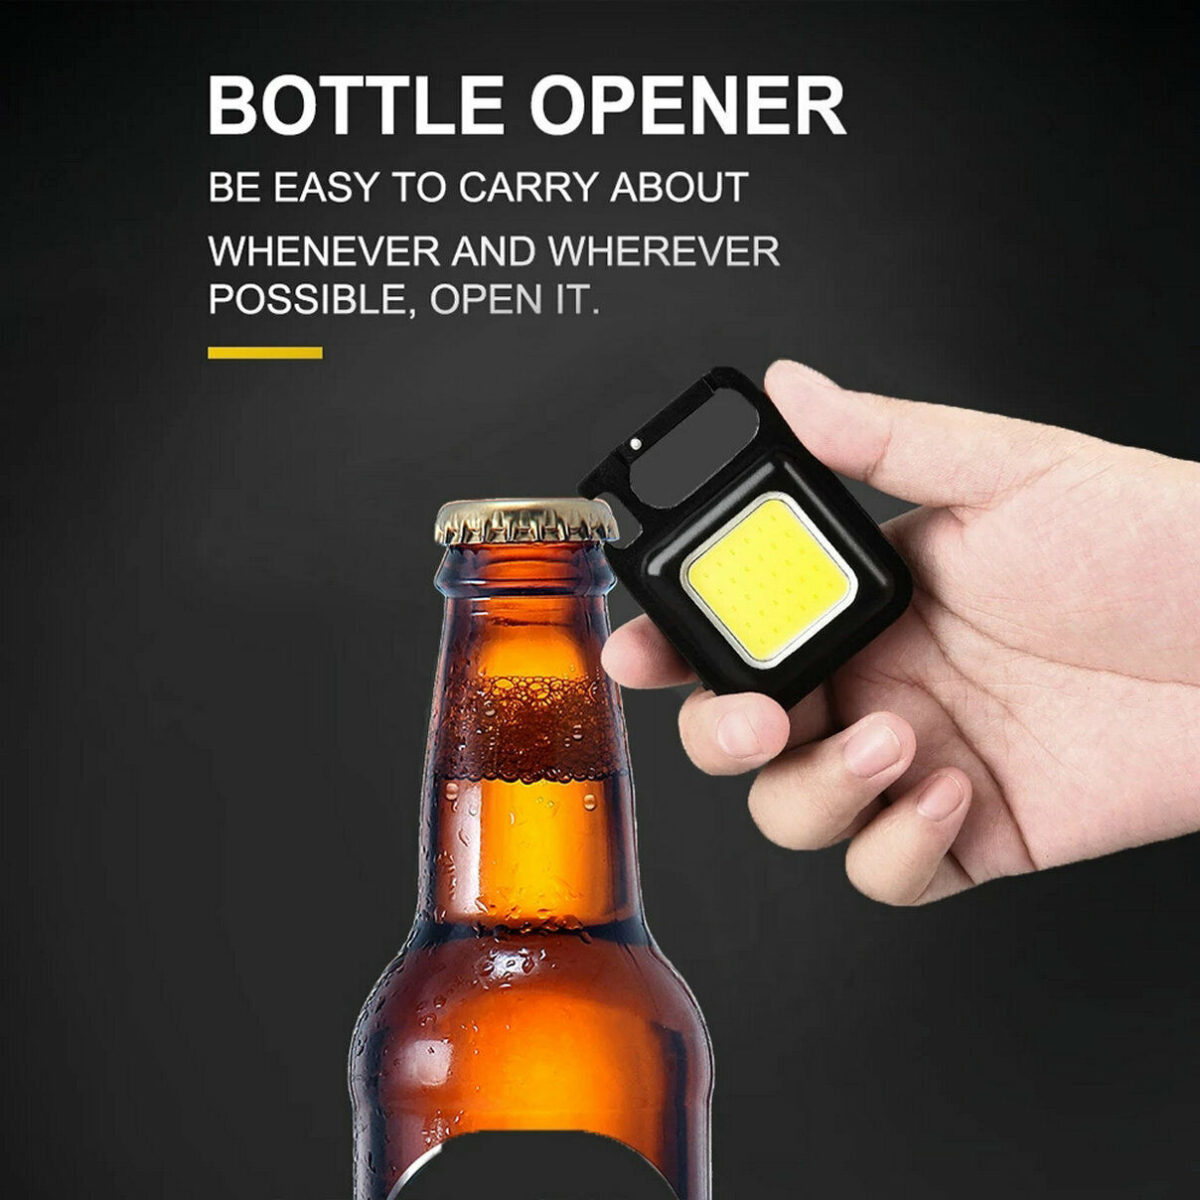 COB Rechargeable Keychain Light IPX5 Waterproof with 4 Light Modes (High/Medium/Low/SOS) & Micro USB Charging, Bottle Opener, Magnetic Base, Adjustable Bracket & Carabiner